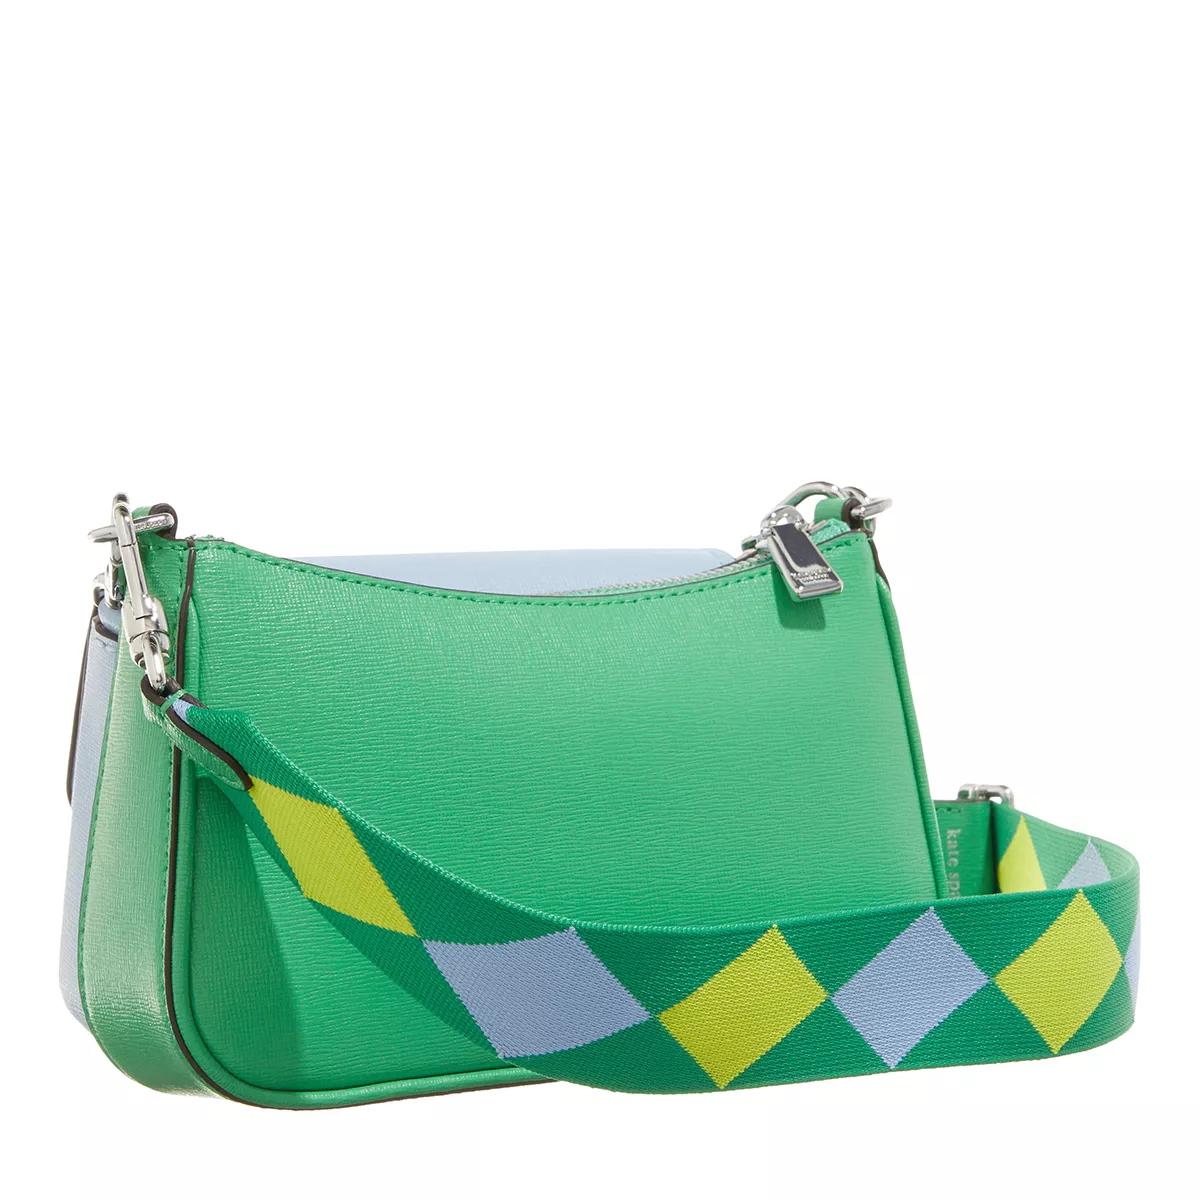 Kate spade new york Crossbody bags Double Up Colorblocked Saffiano Leather in groen